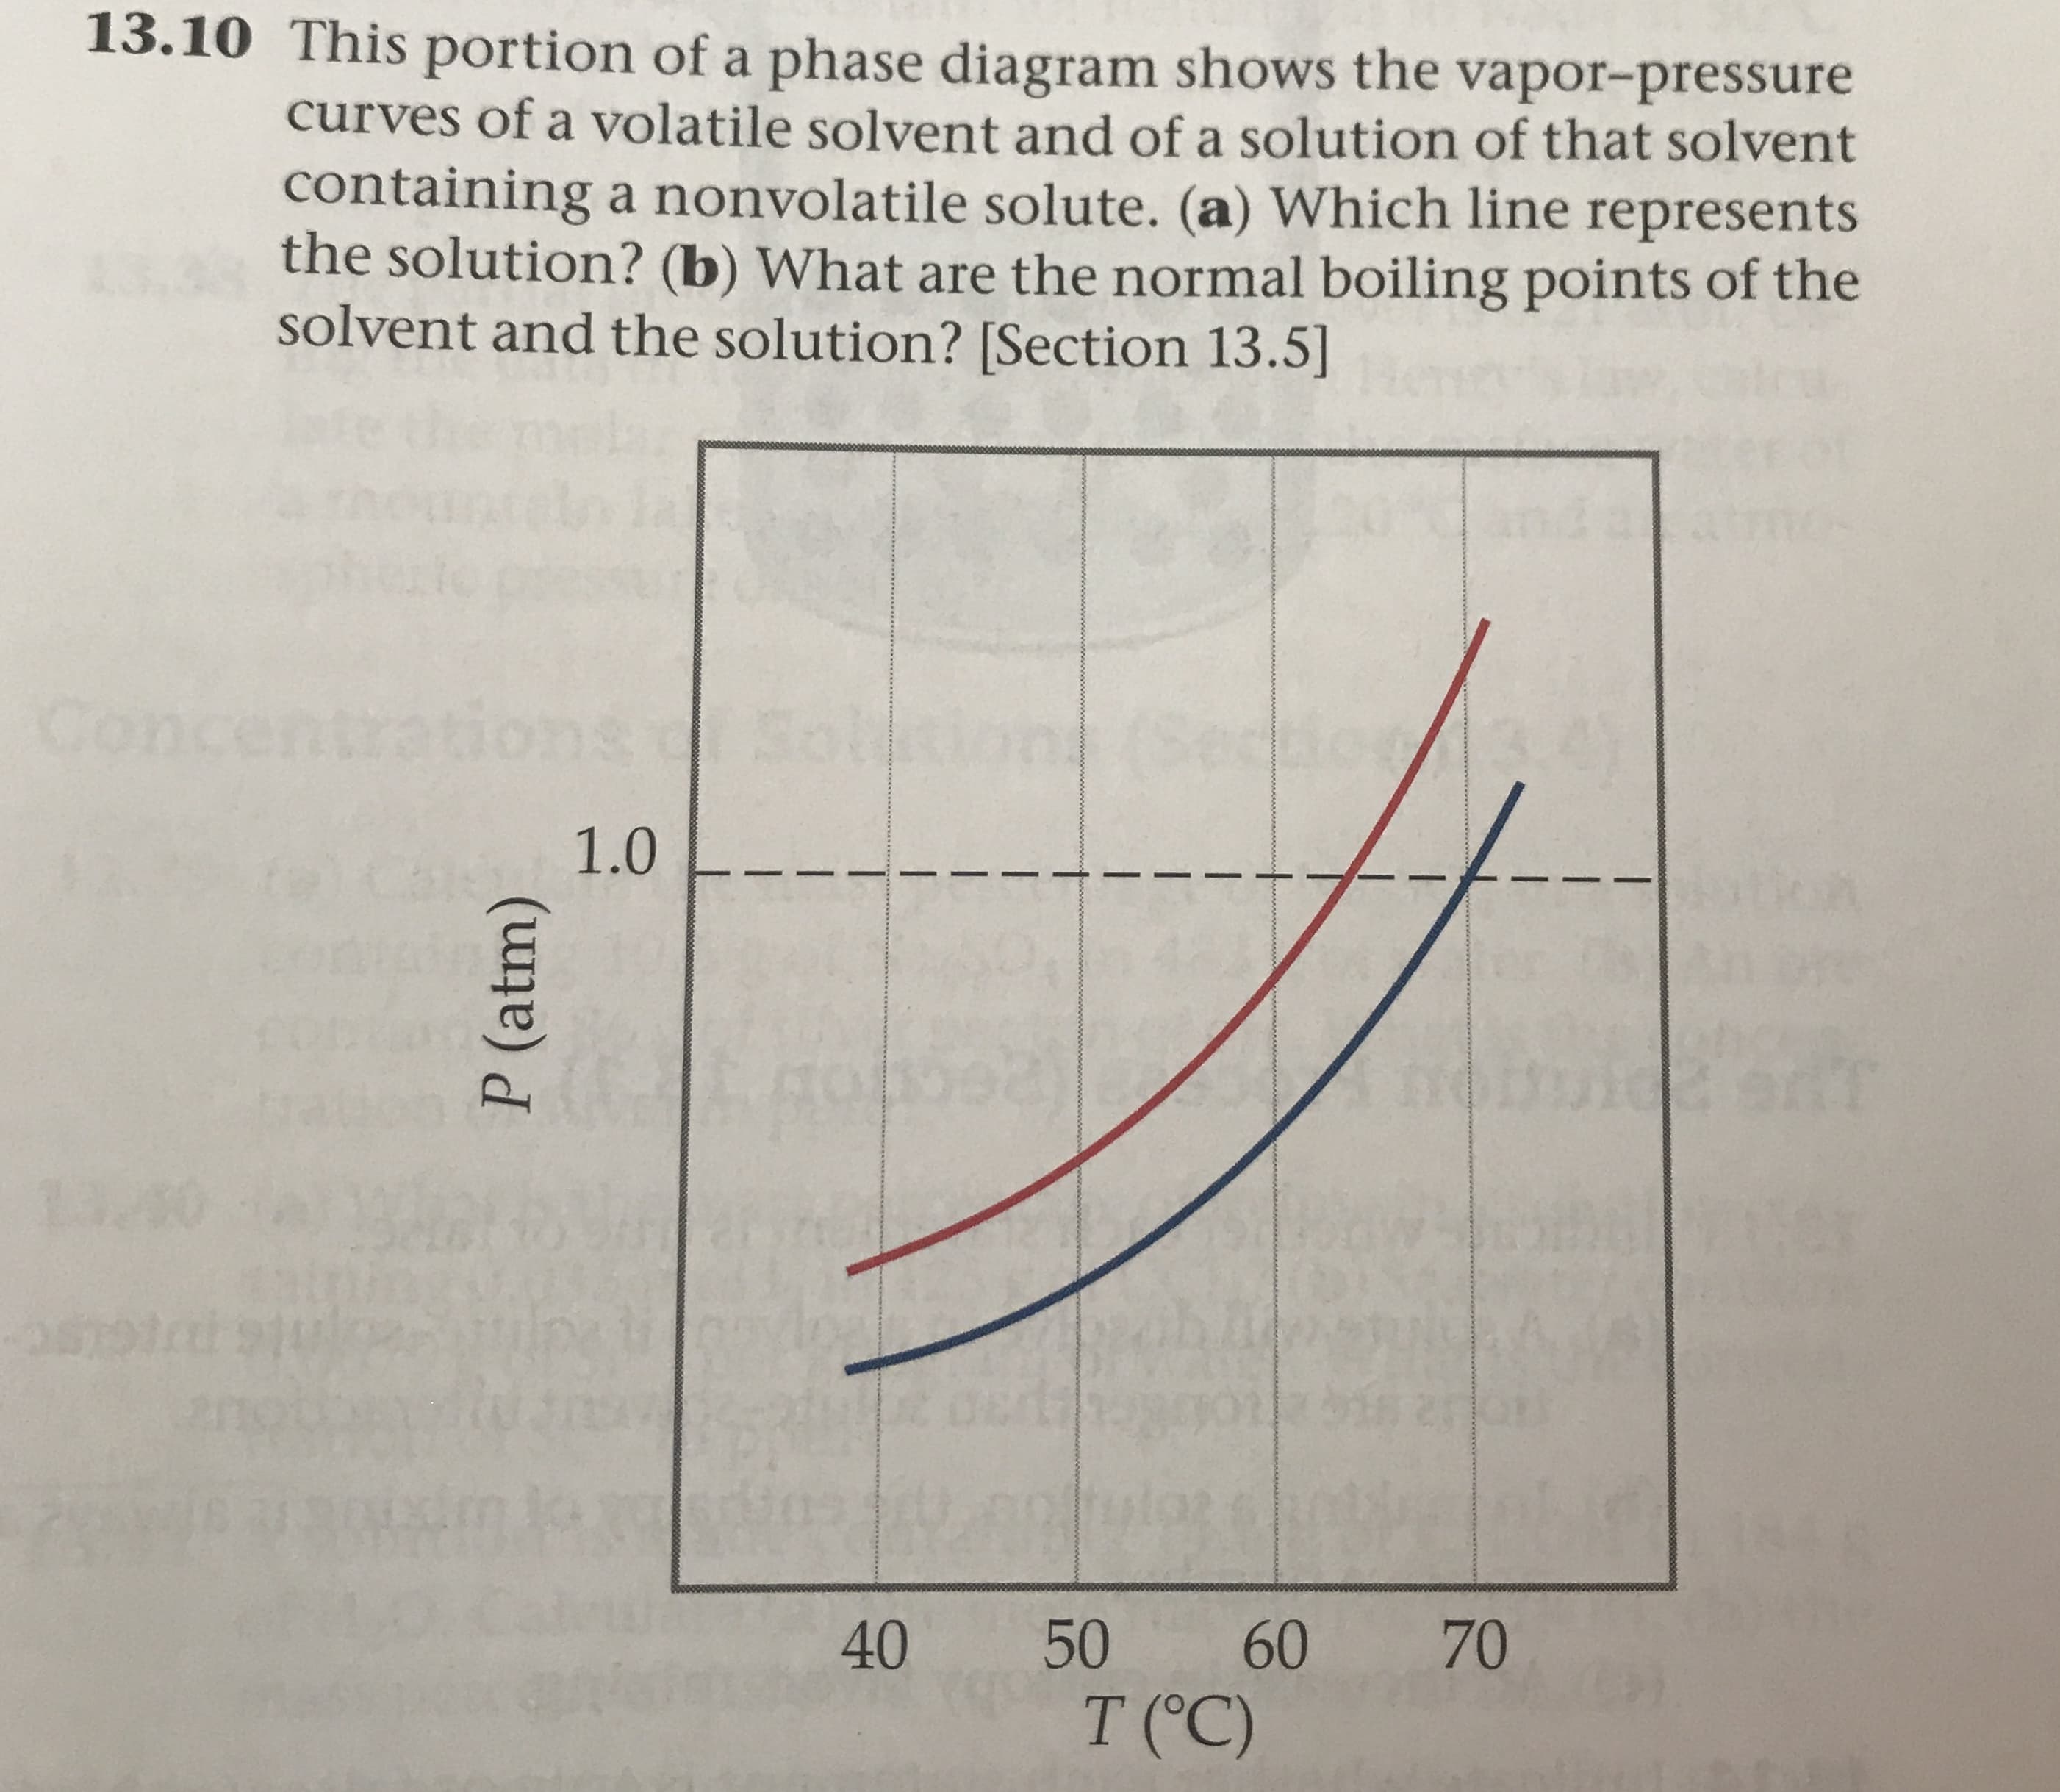 13.10 This portion of a phase diagram shows the vapor-pressure
curves of a volatile solvent and of a solution of that solvent
containing a nonvolatile solute. (a) Which line represents
the solution? (b) What are the normal boiling points of the
solvent and the solution? [Section 13.5]
Com
Centra
1.0
3
40
50
70
60
TОC)
P (atm)
